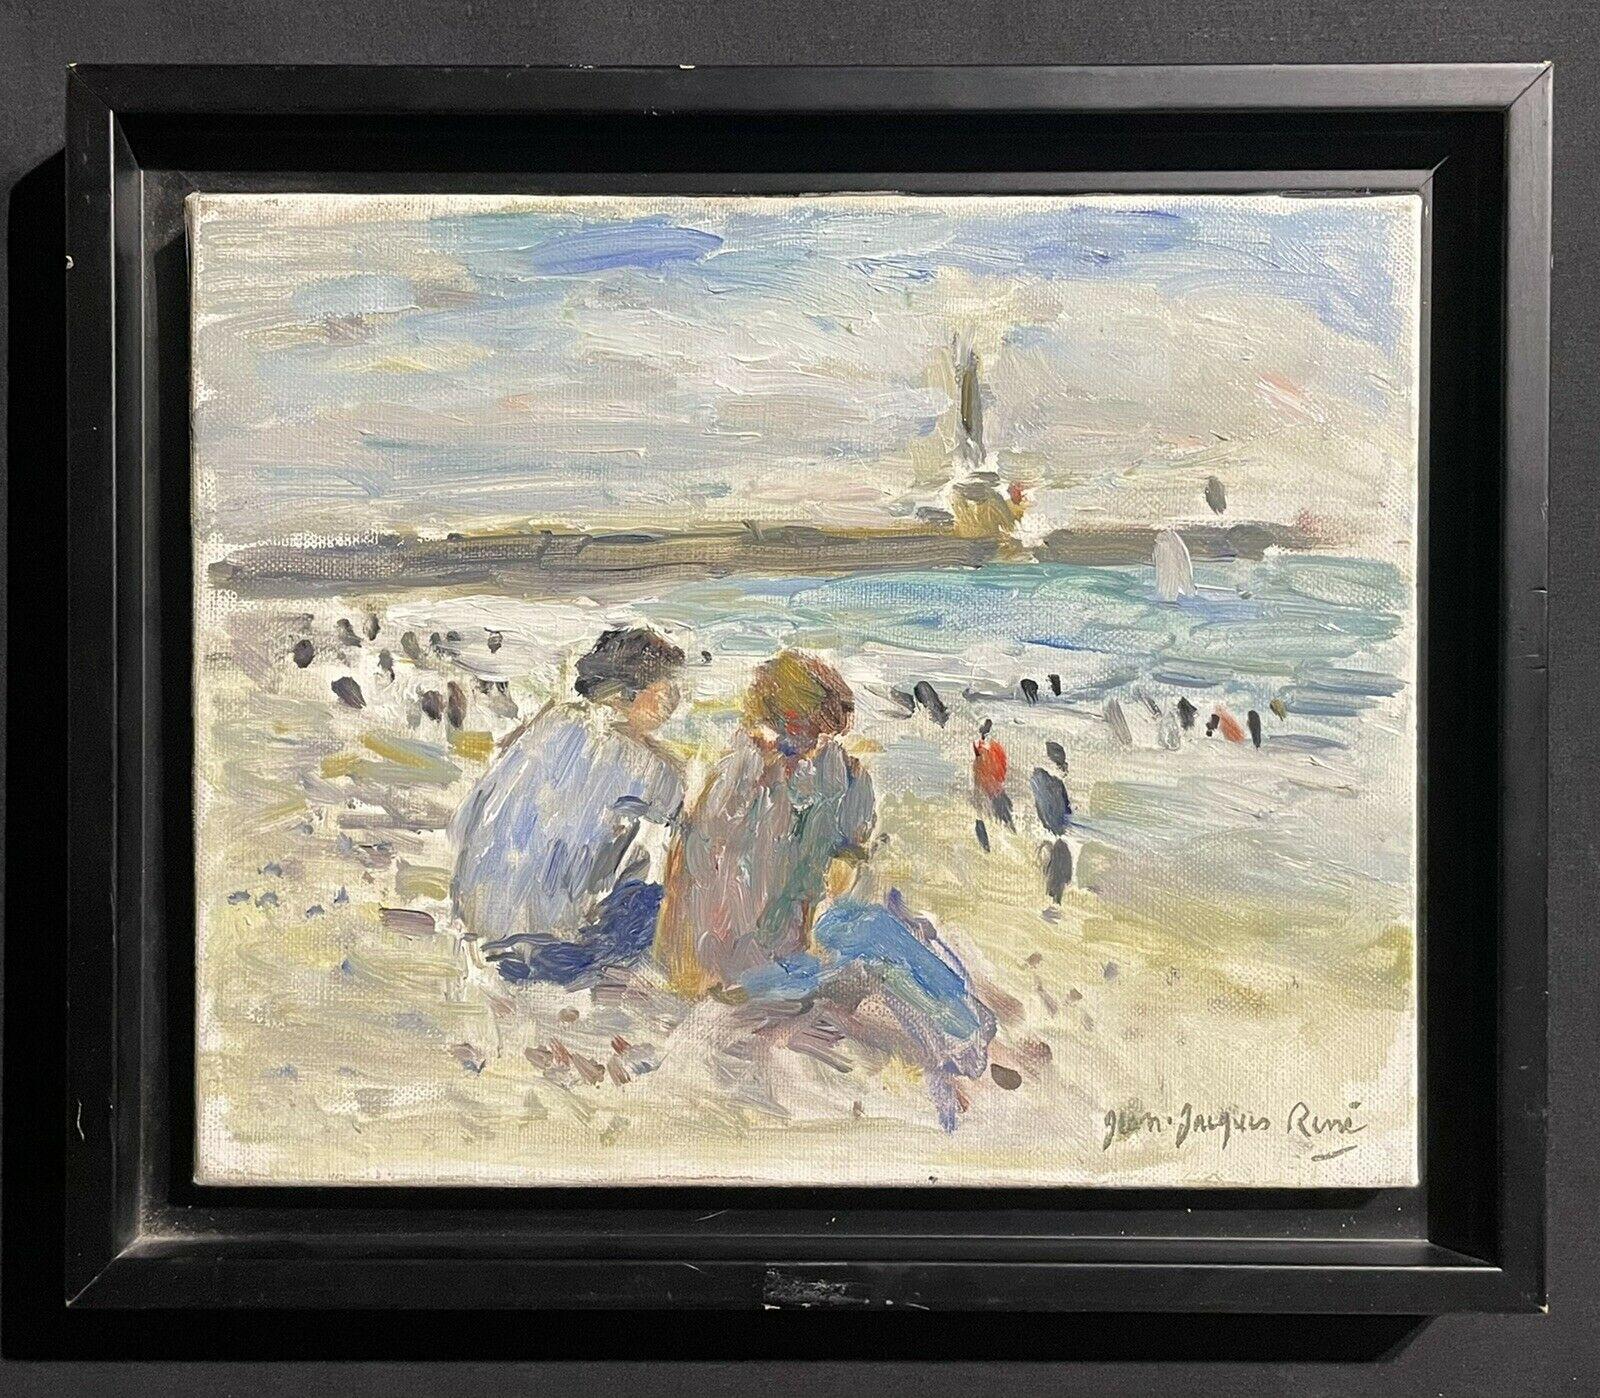 JEAN JACQUES RENE (FRENCH B.1943) SIGNED OIL - FIGURES SEATED LE HAVRE BEACH - Painting by Jean Jacques Rene